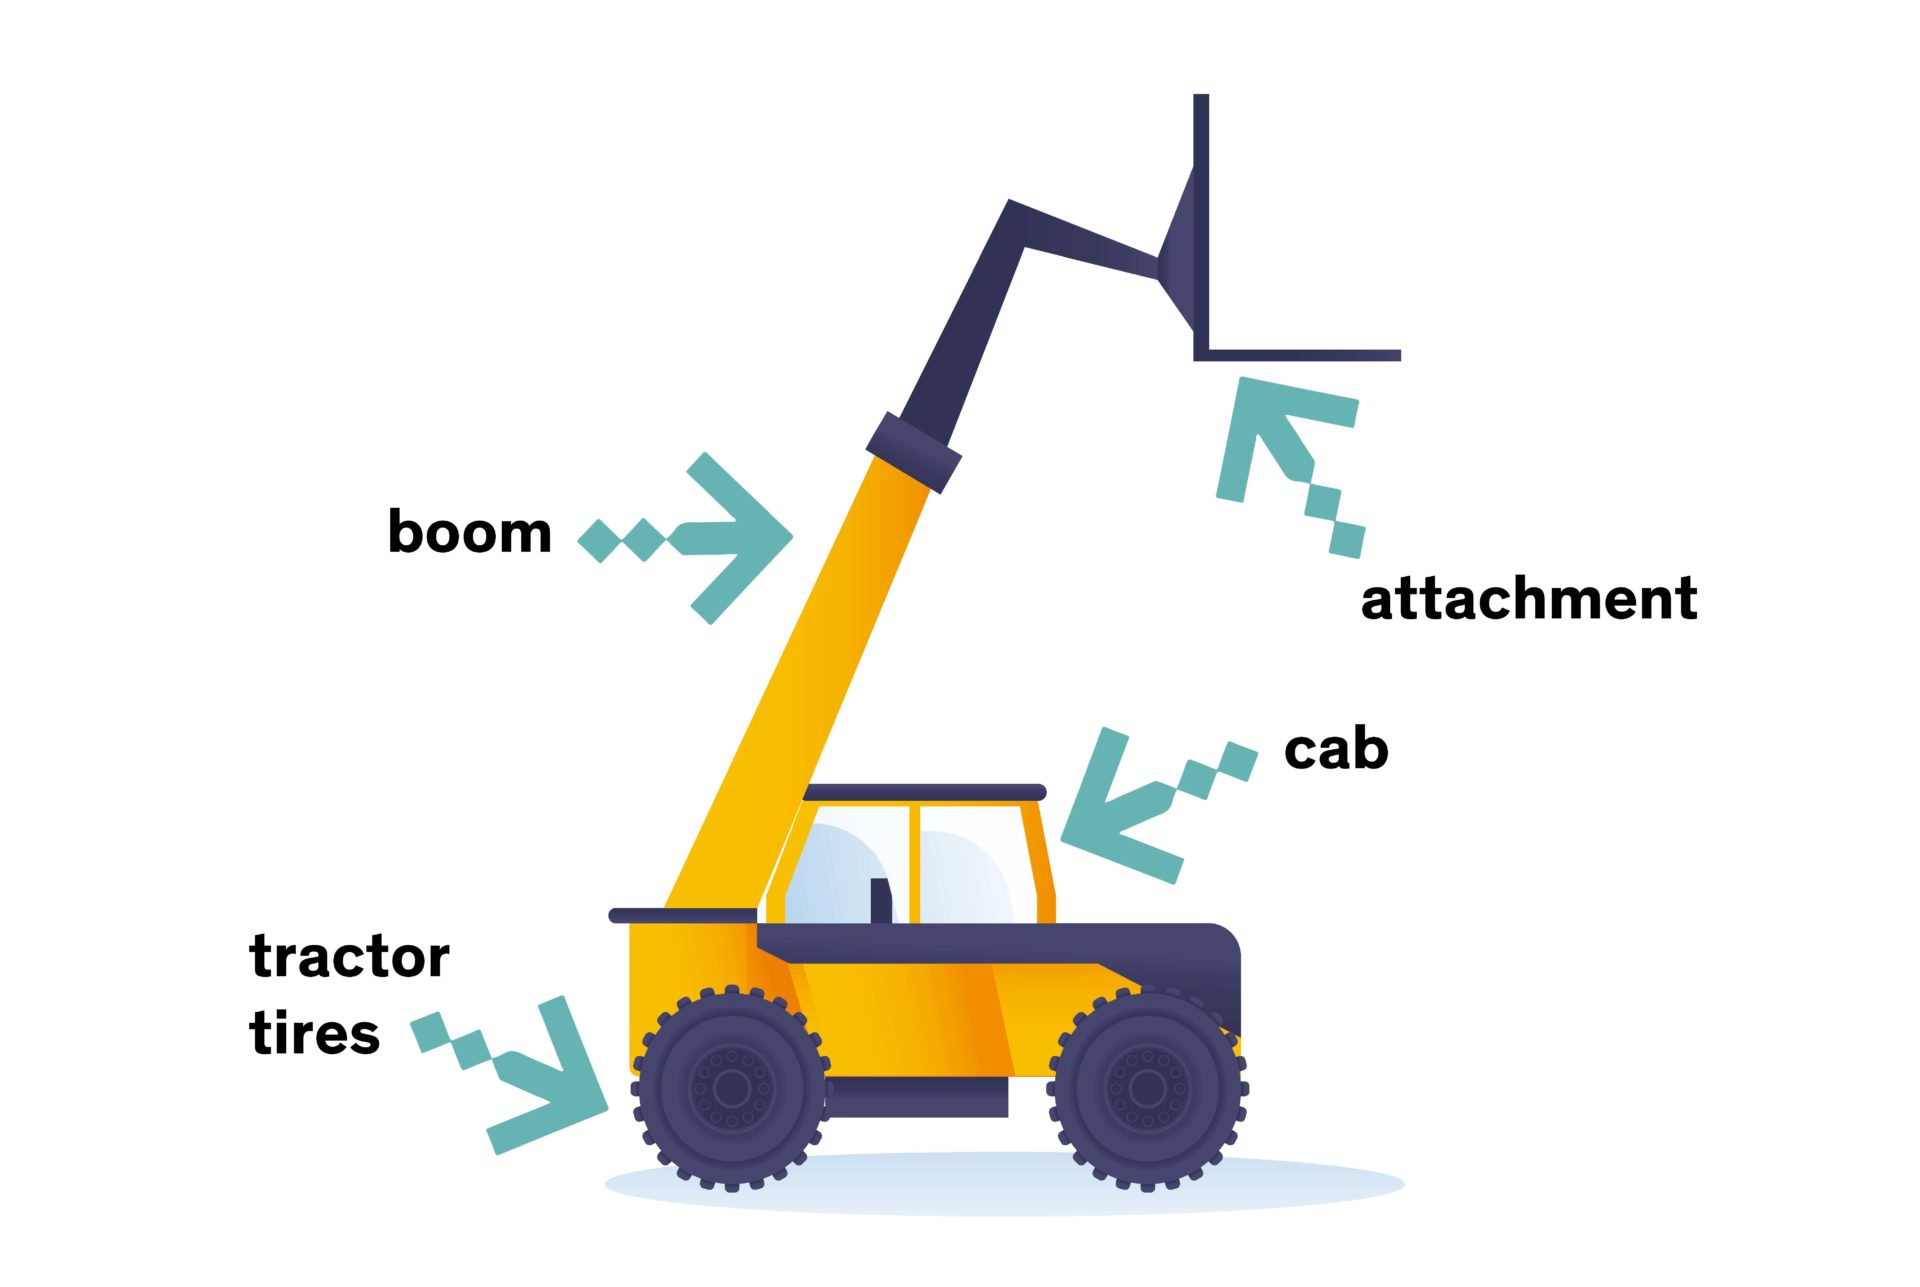 Graphic of telescopic handler with its four main components labeled: telehandler cab, telehandler boom, telehandler tractor tires and telehandler attachment